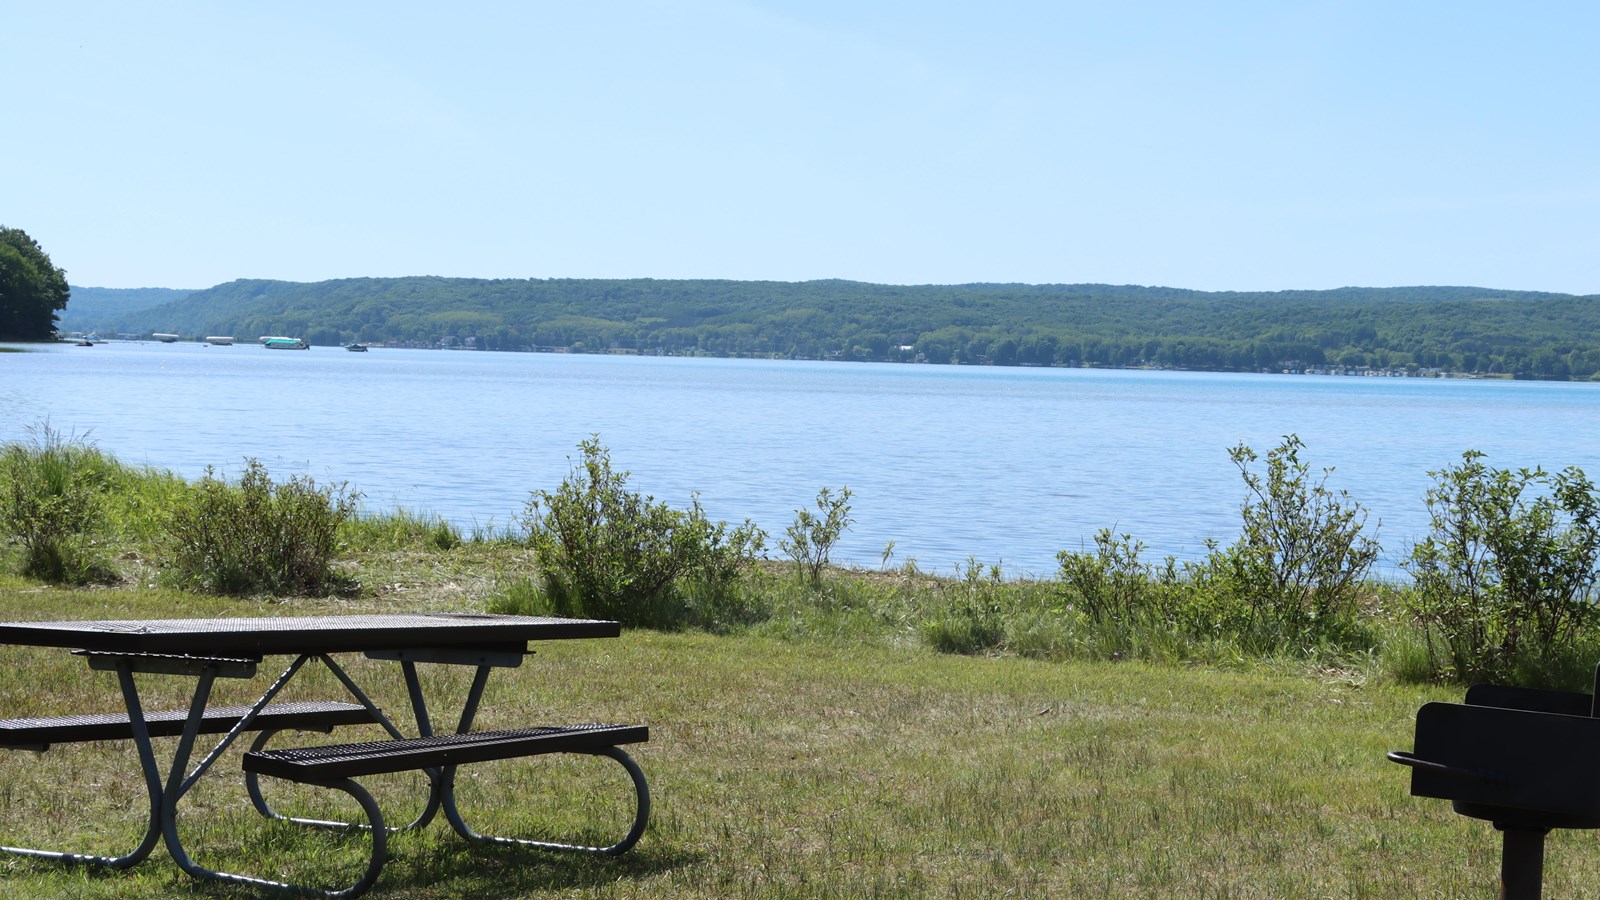 The clear blue lake opens from a grassy shoreline with a few small shrubs, picnic table and grill.